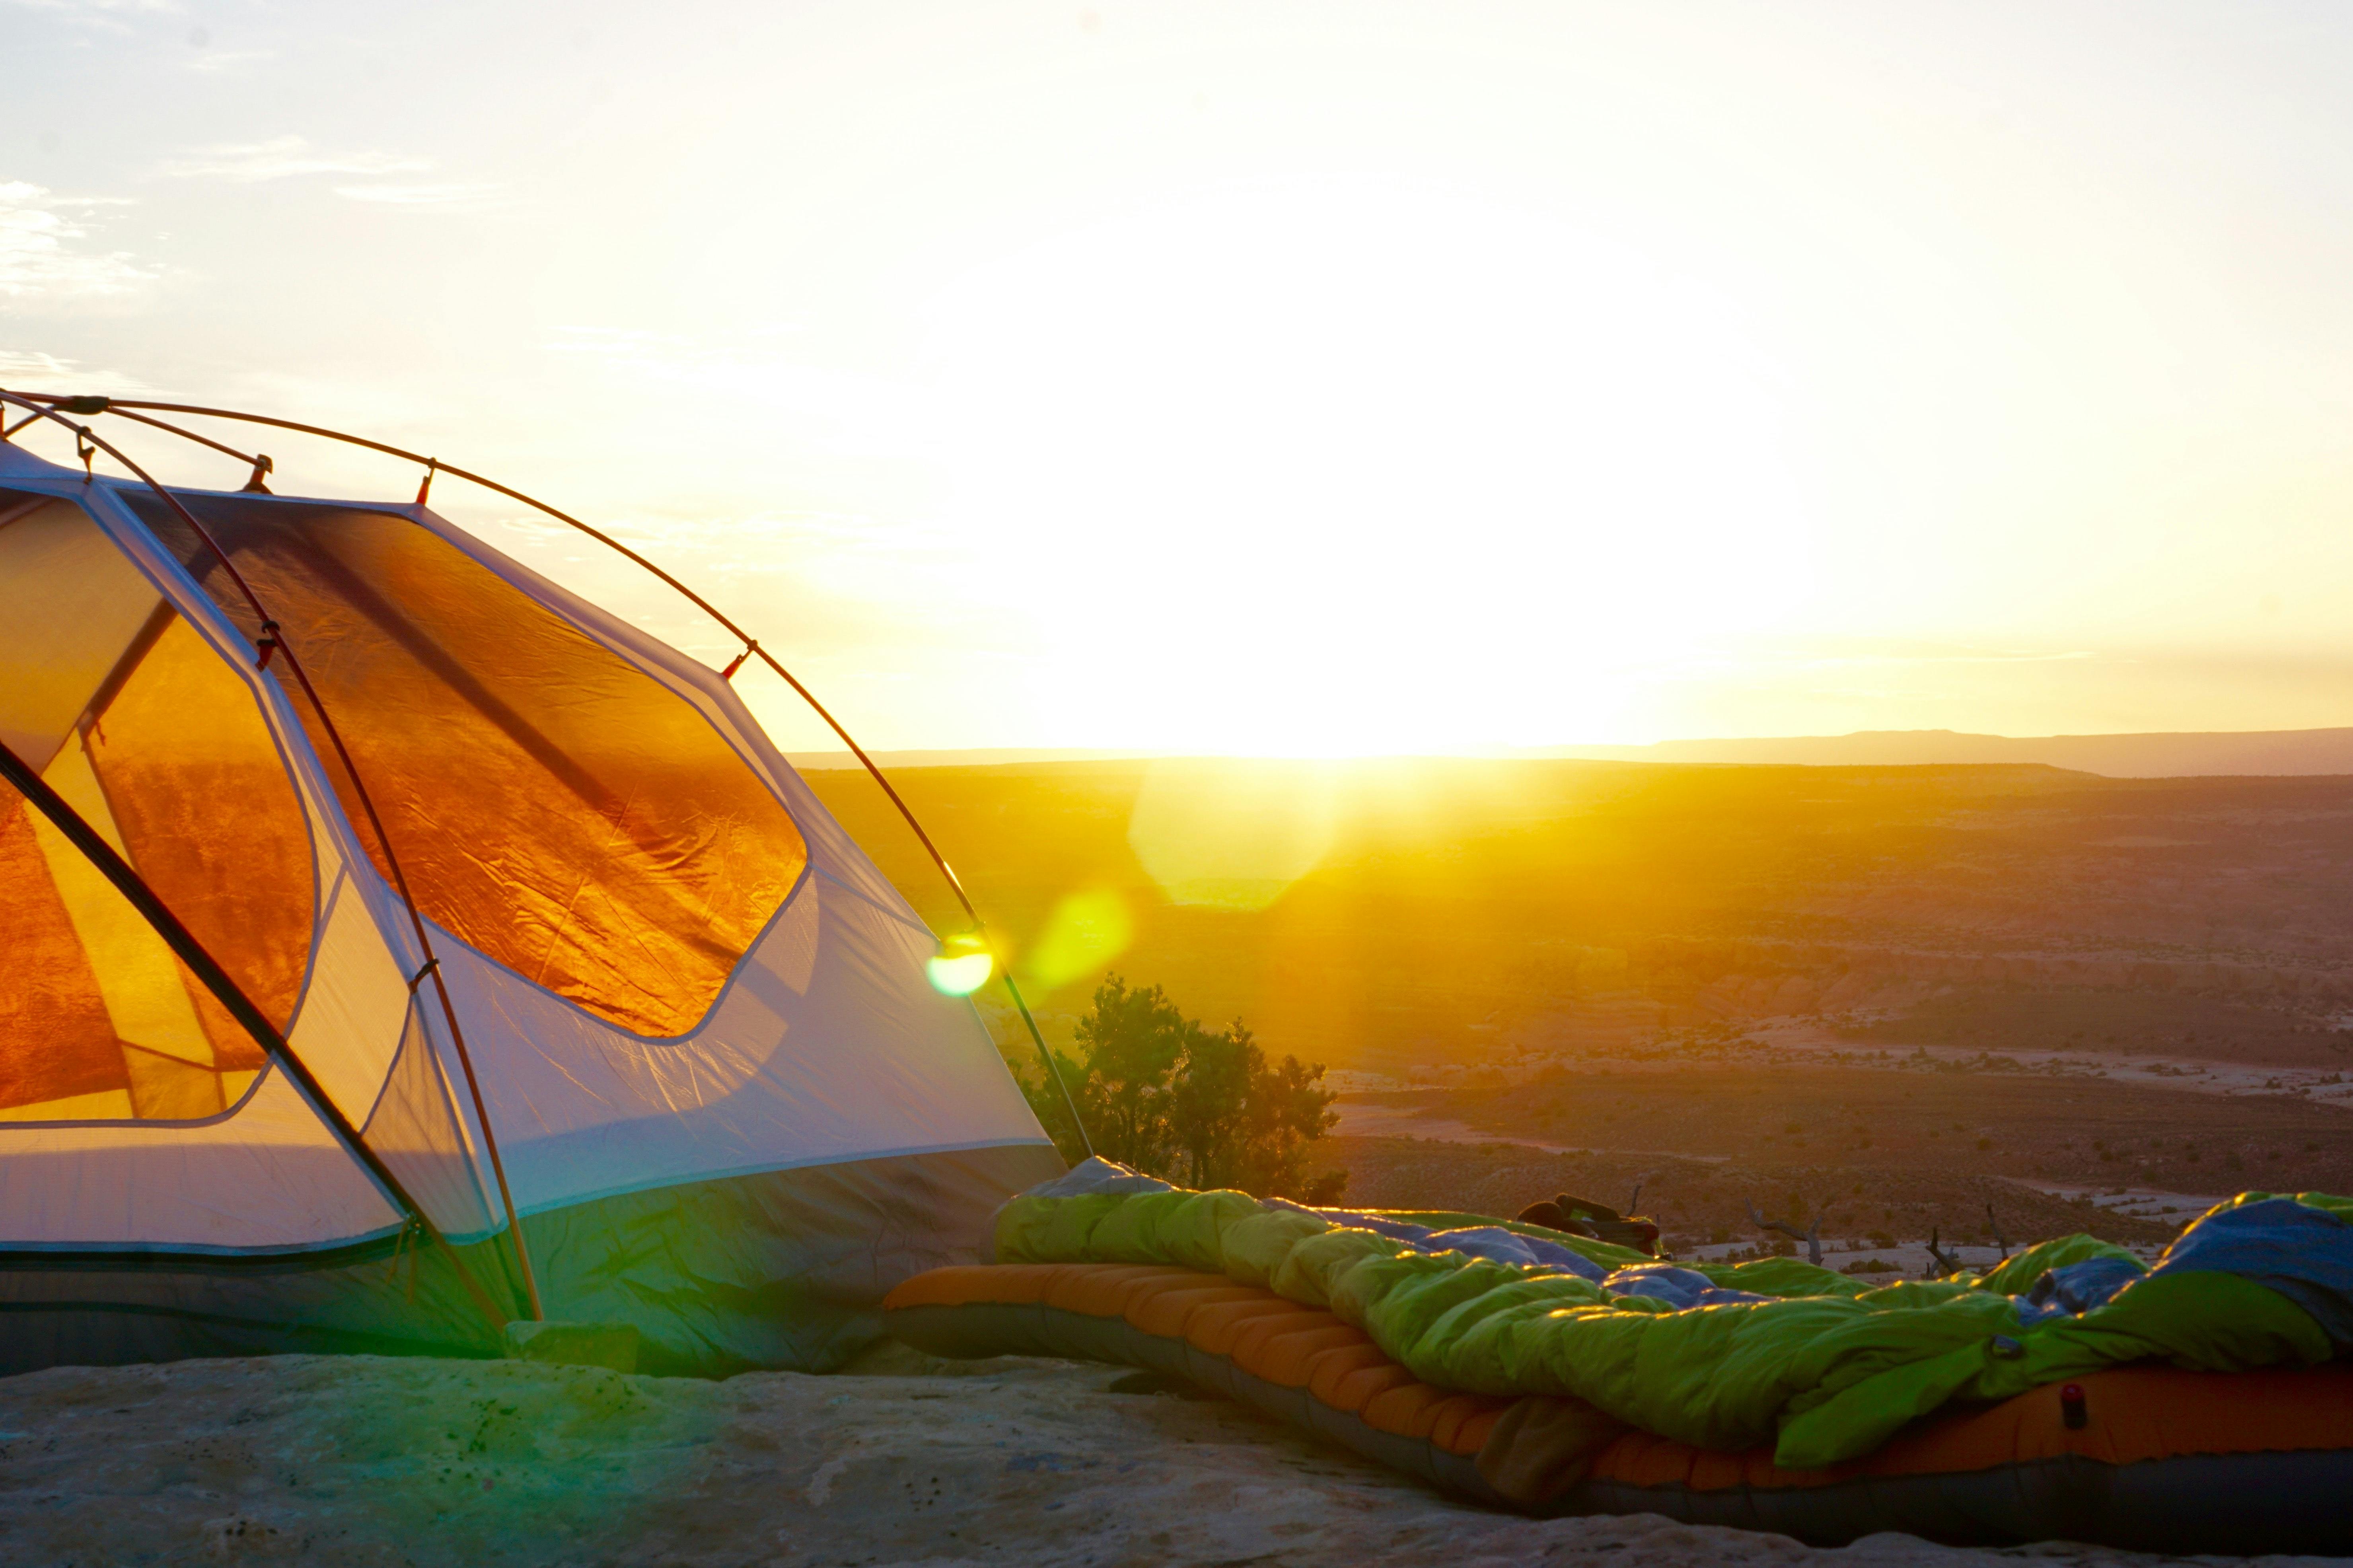 A tent and sleeping pad sit on a hillside